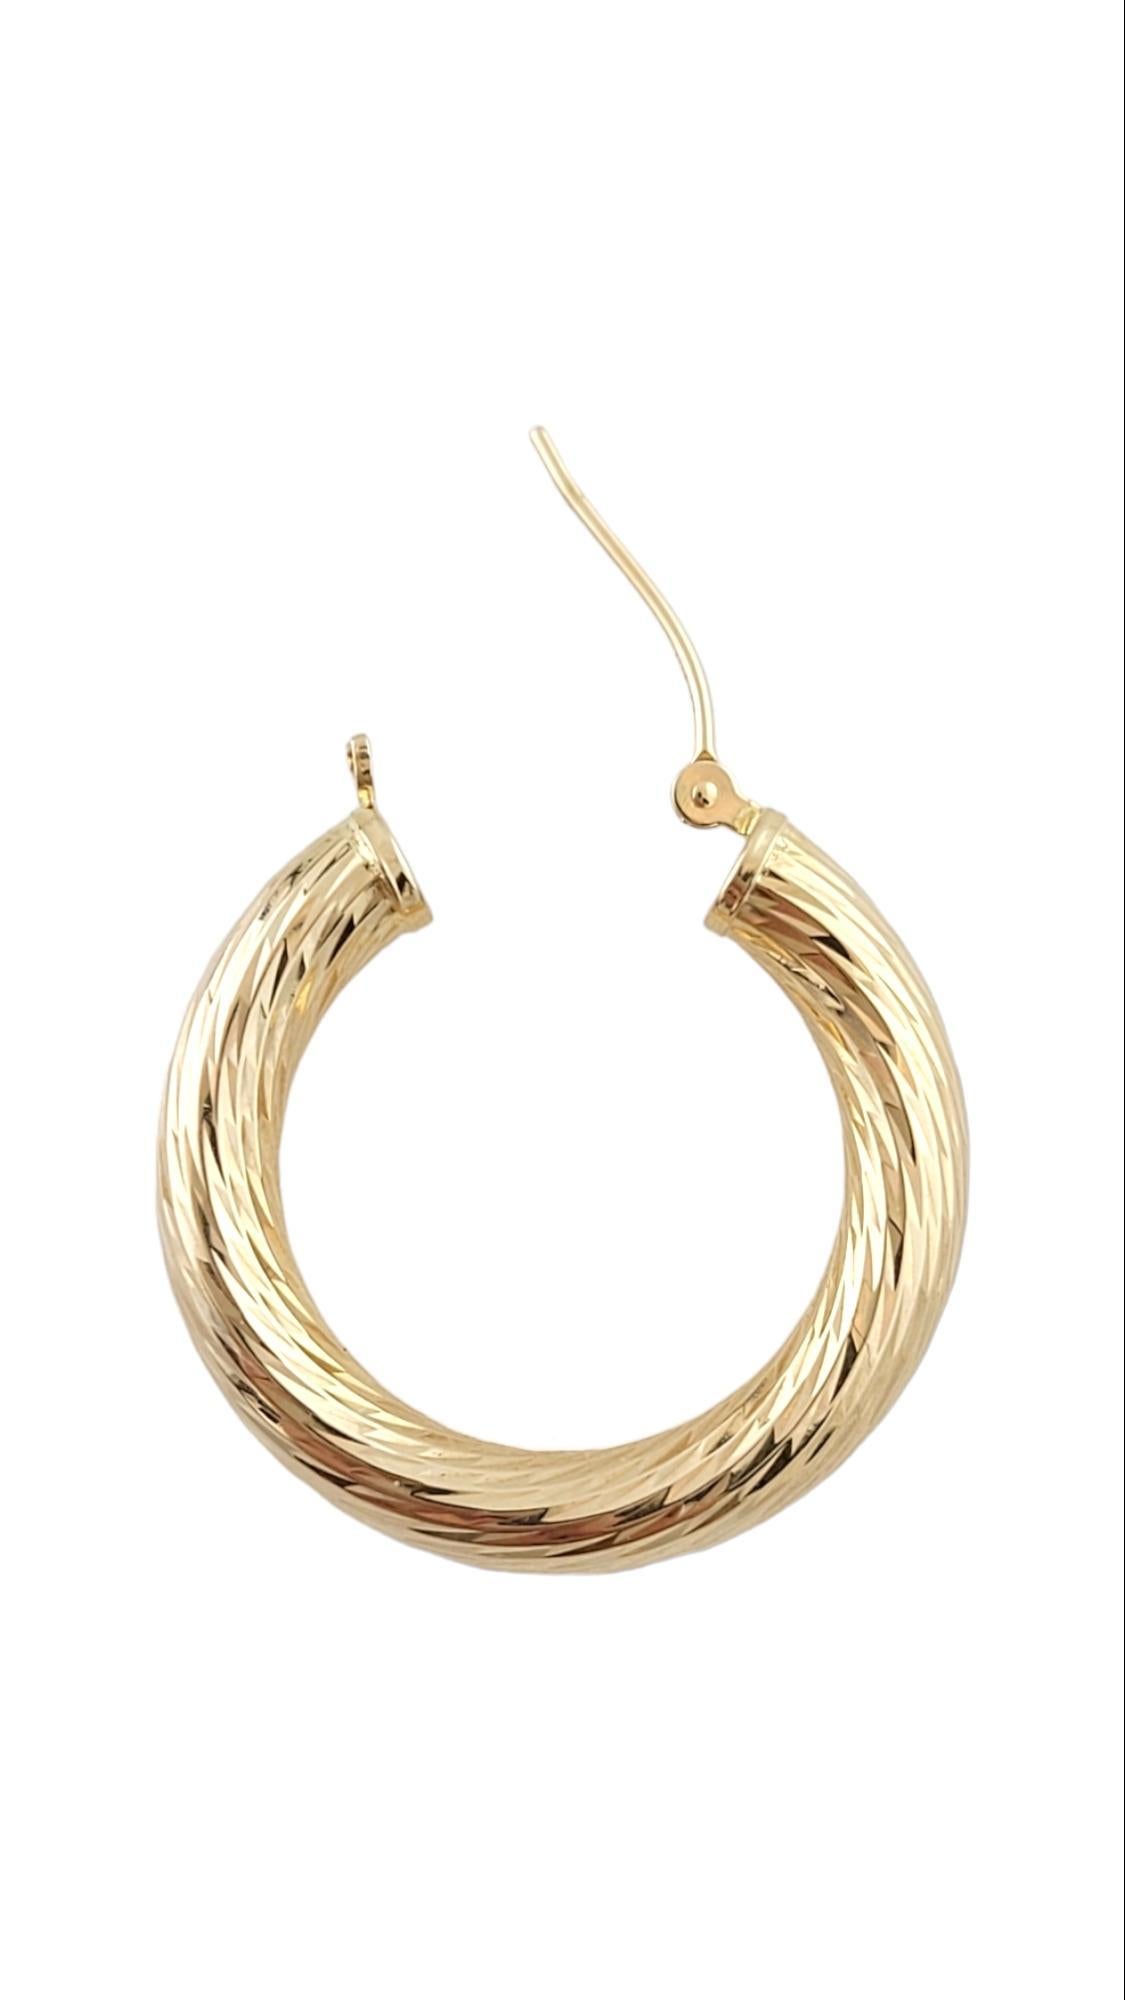 14K Yellow Gold Textured Hoop Earrings #15902 In Good Condition For Sale In Washington Depot, CT